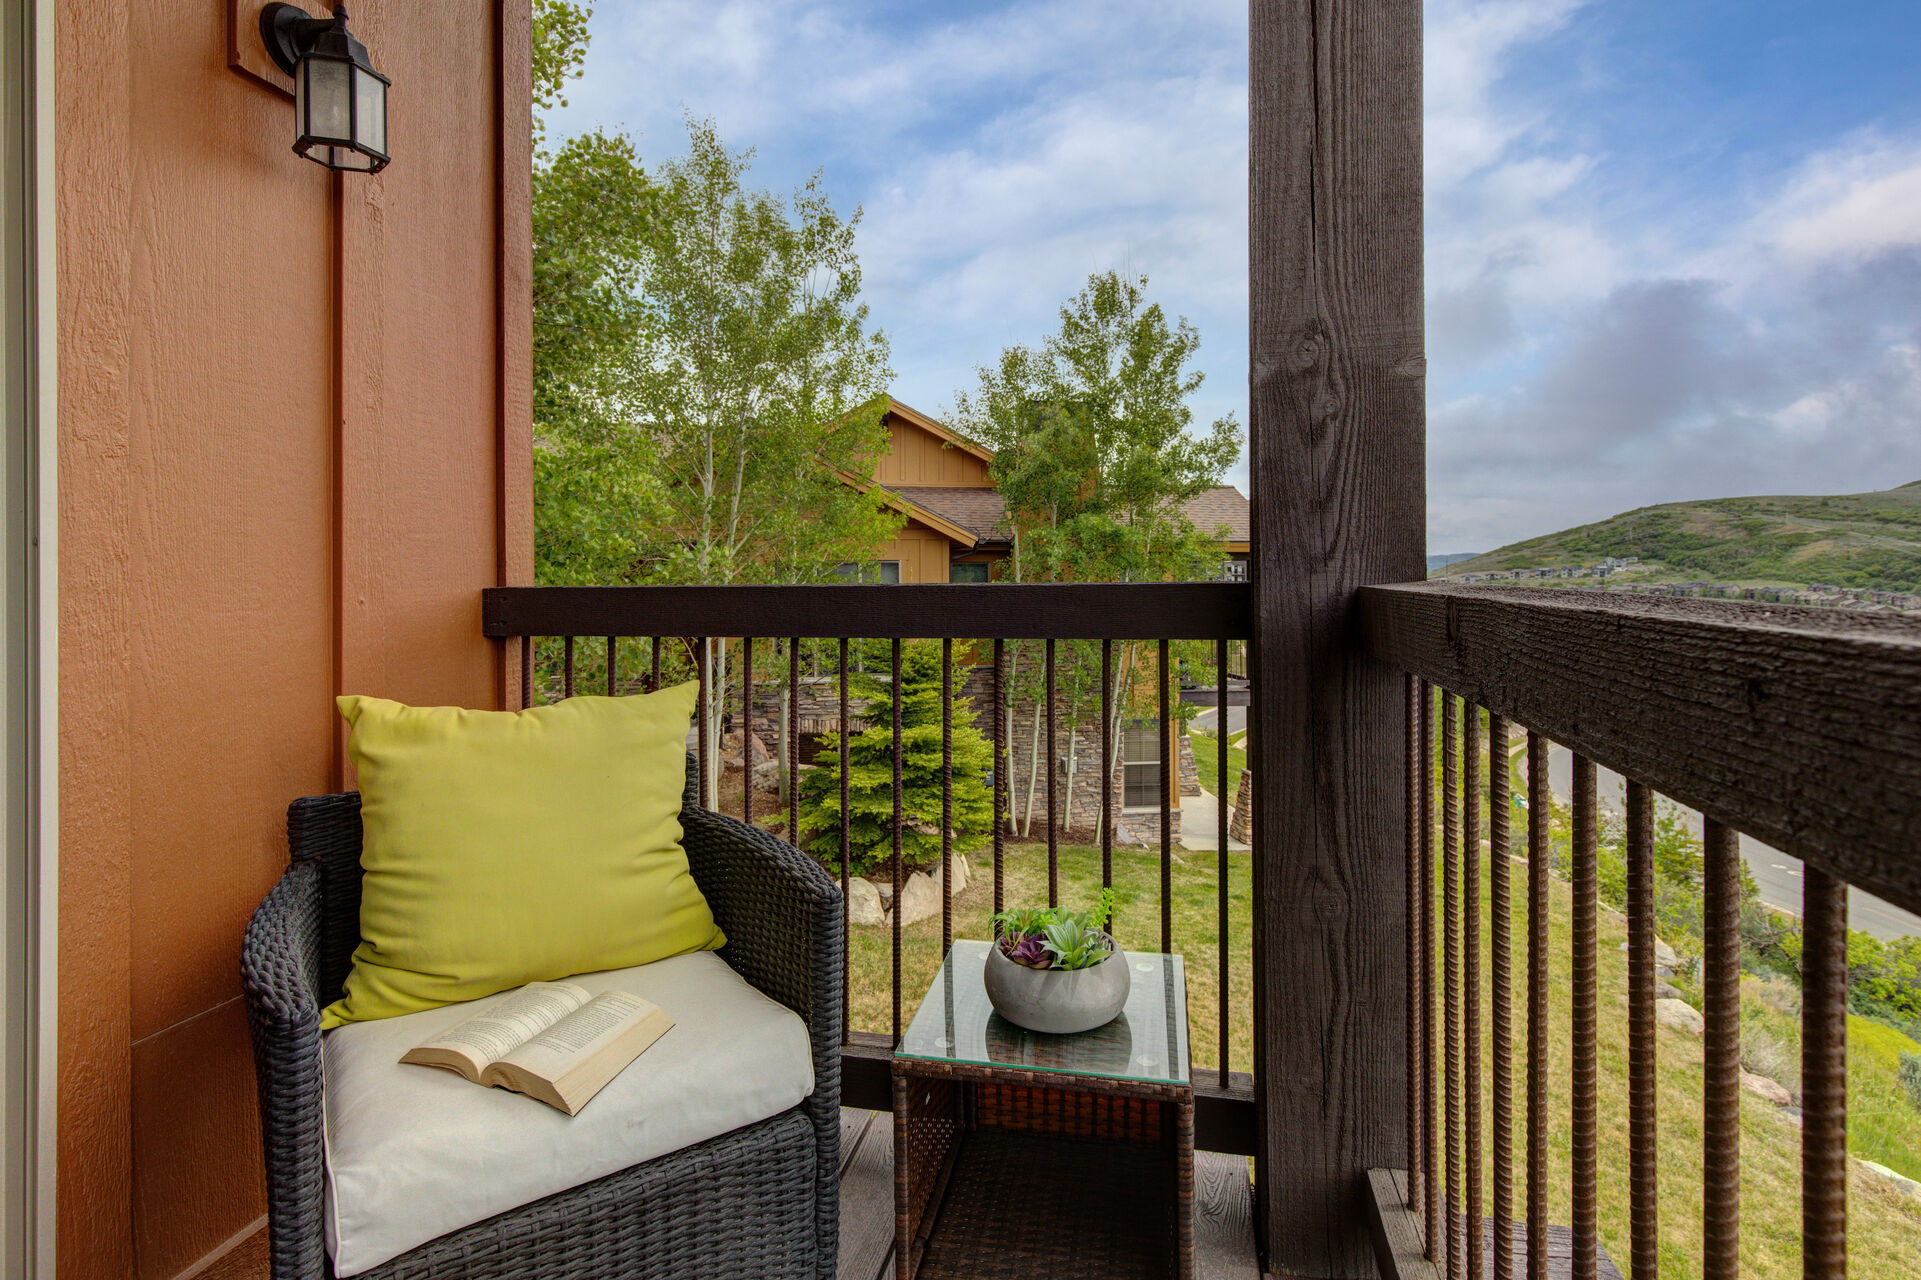 Main Level Private Deck with BBQ grill, gorgeous surrounding views, and comfortable outdoor furnishings